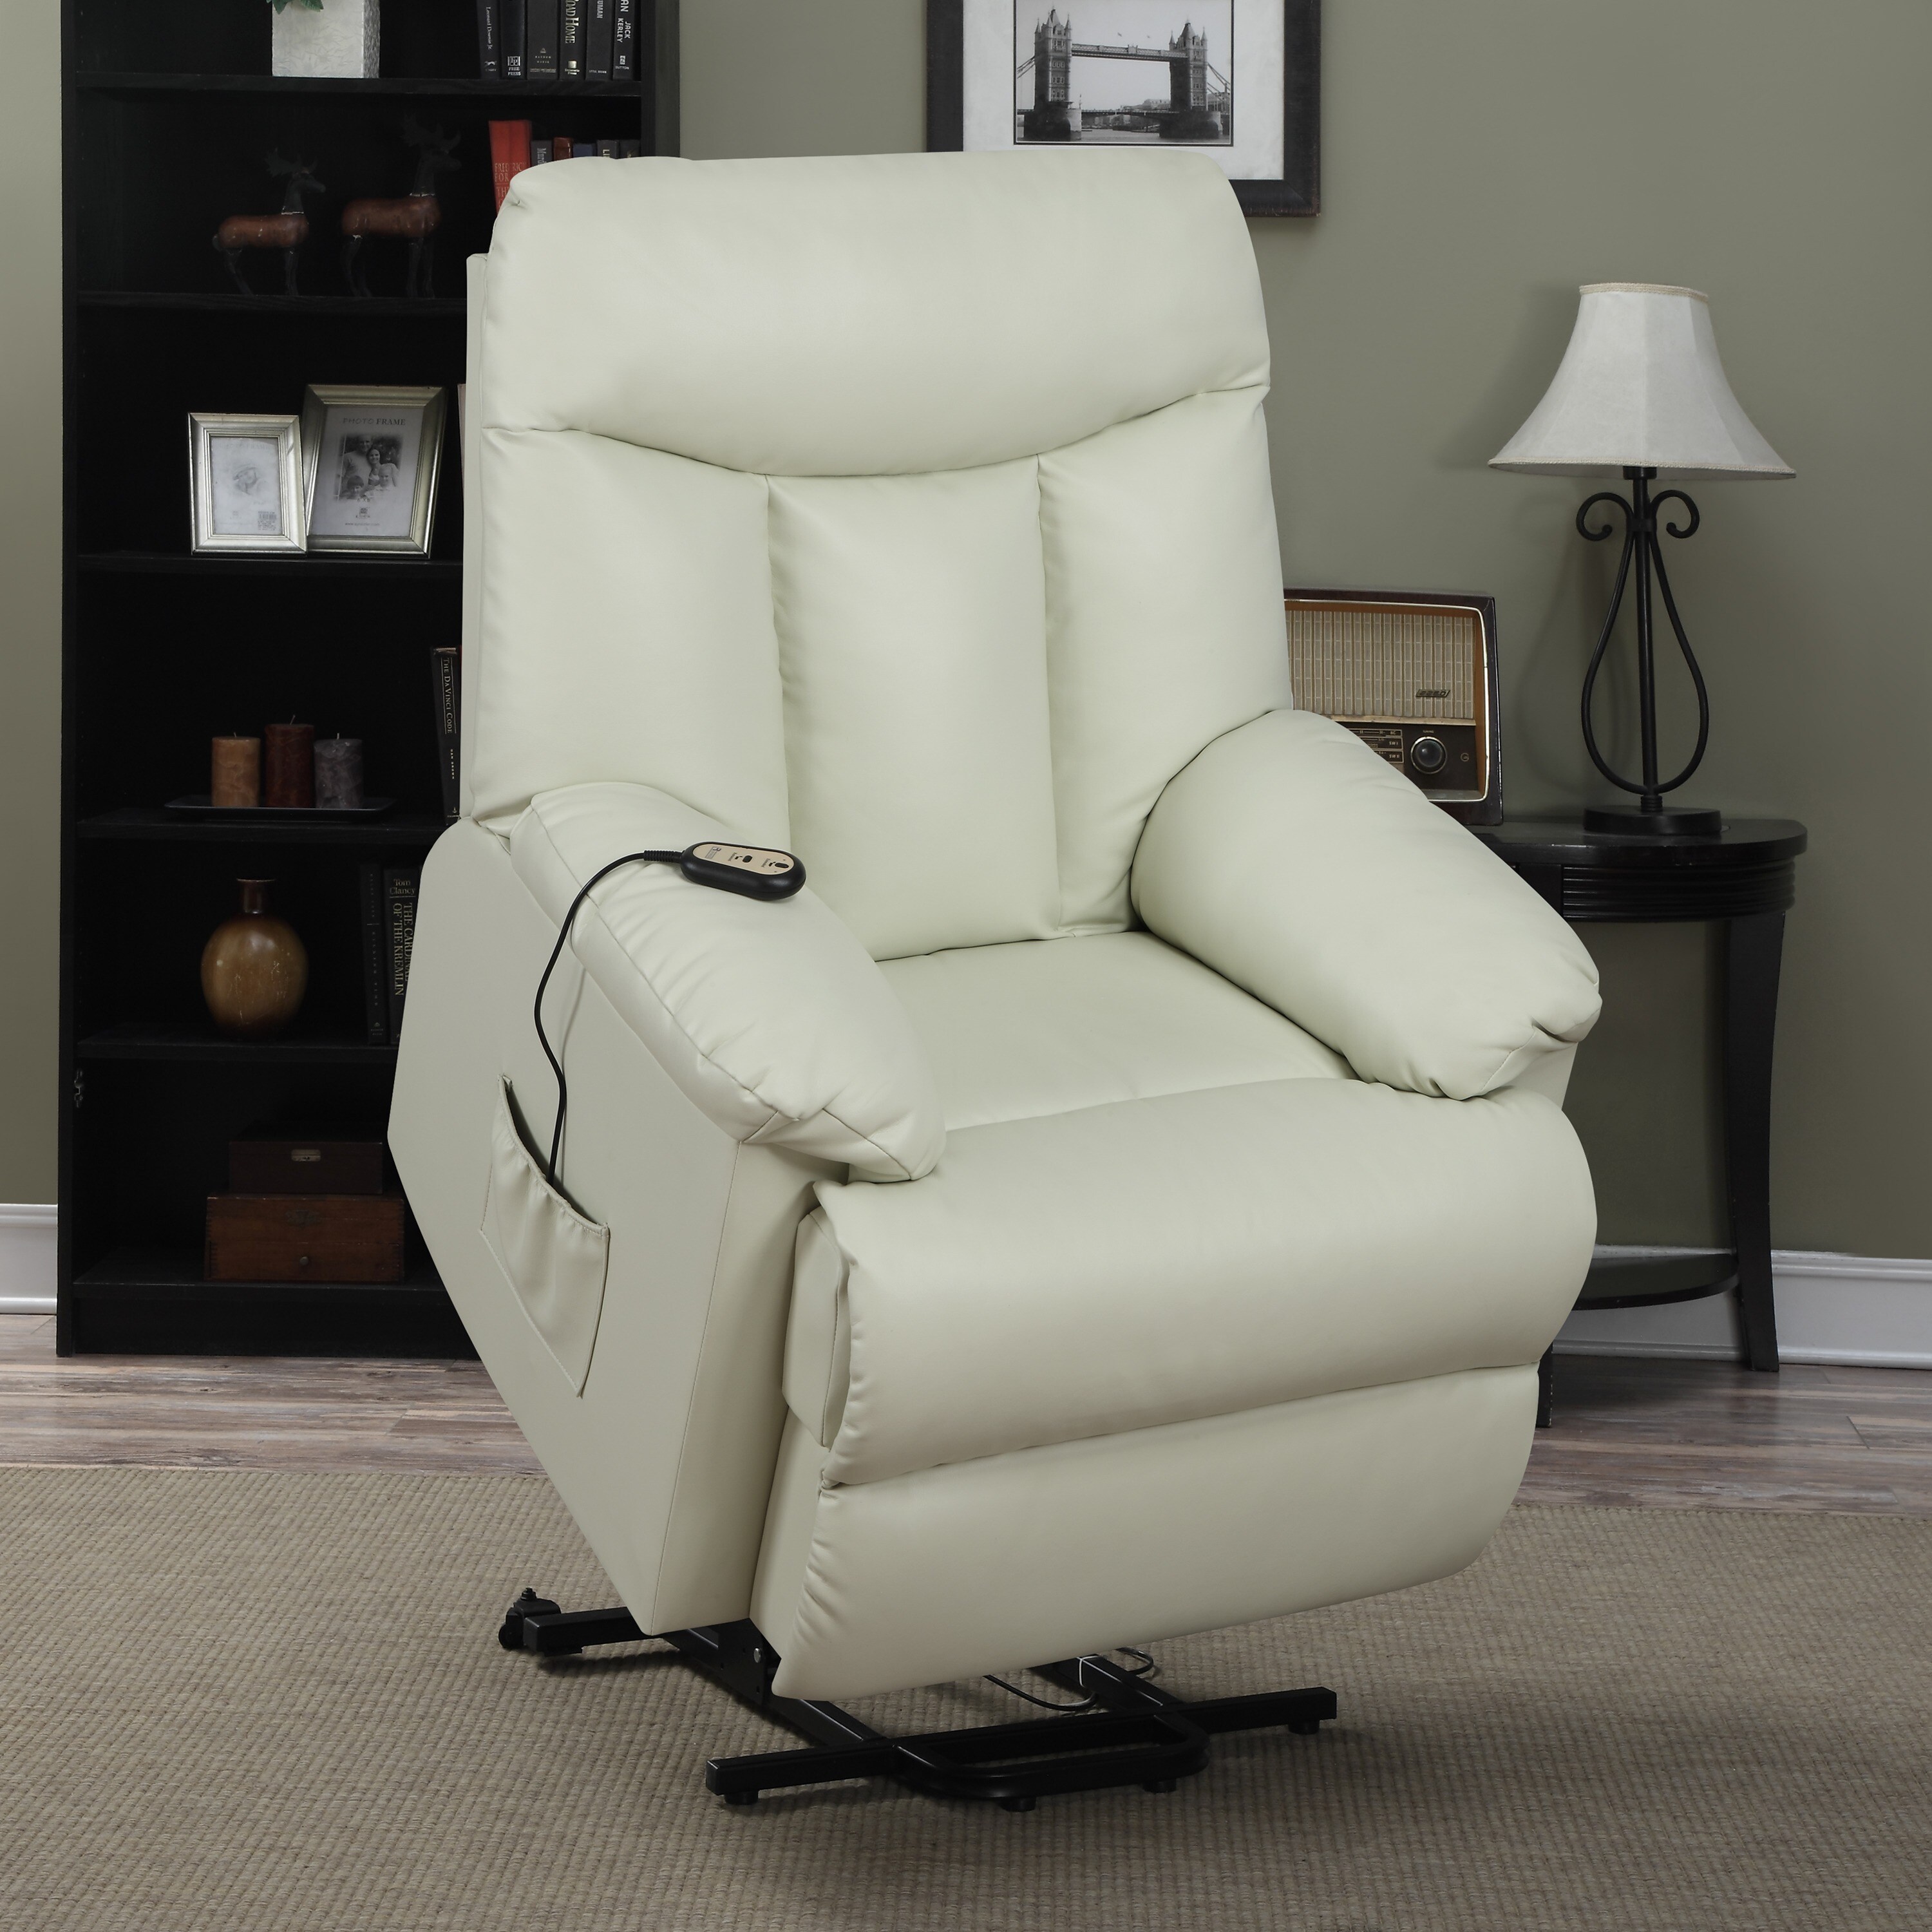 Power Leather Recliner Lift Chair Ultra Mobility Assist Seat Medical